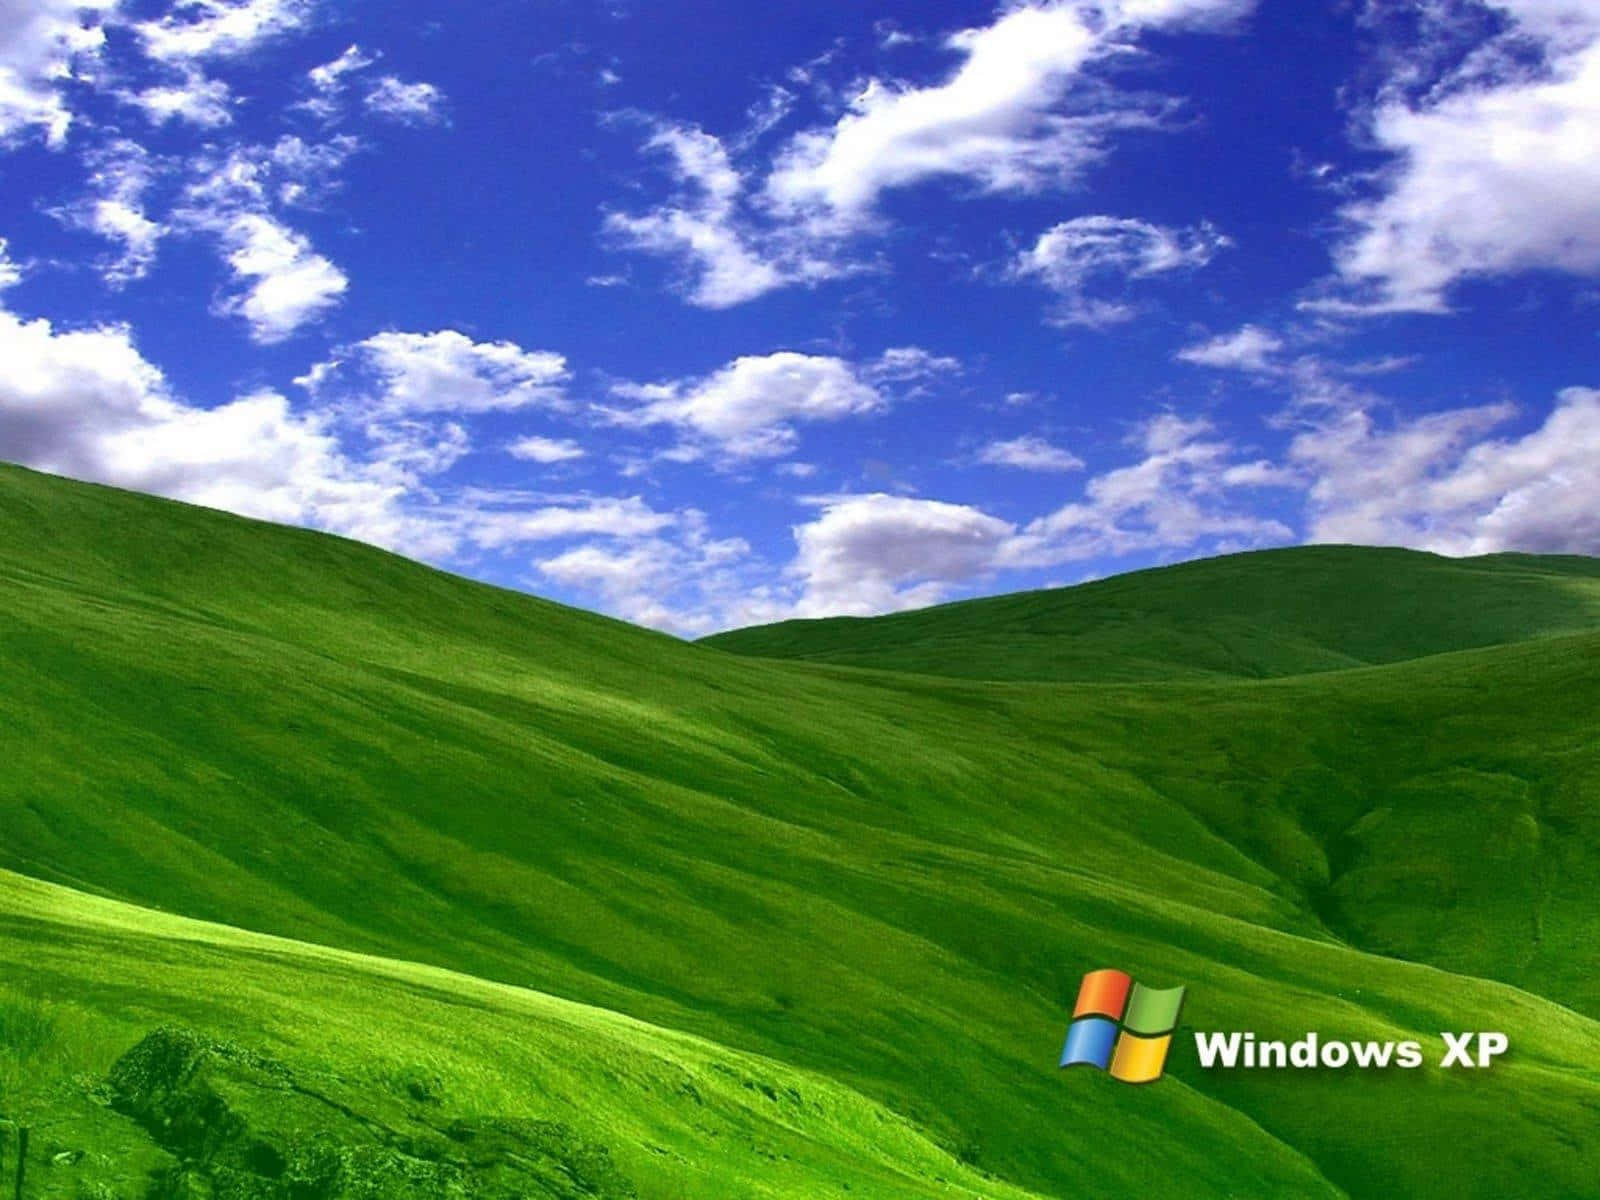 Download 'Beautiful view of Windows Hill' 